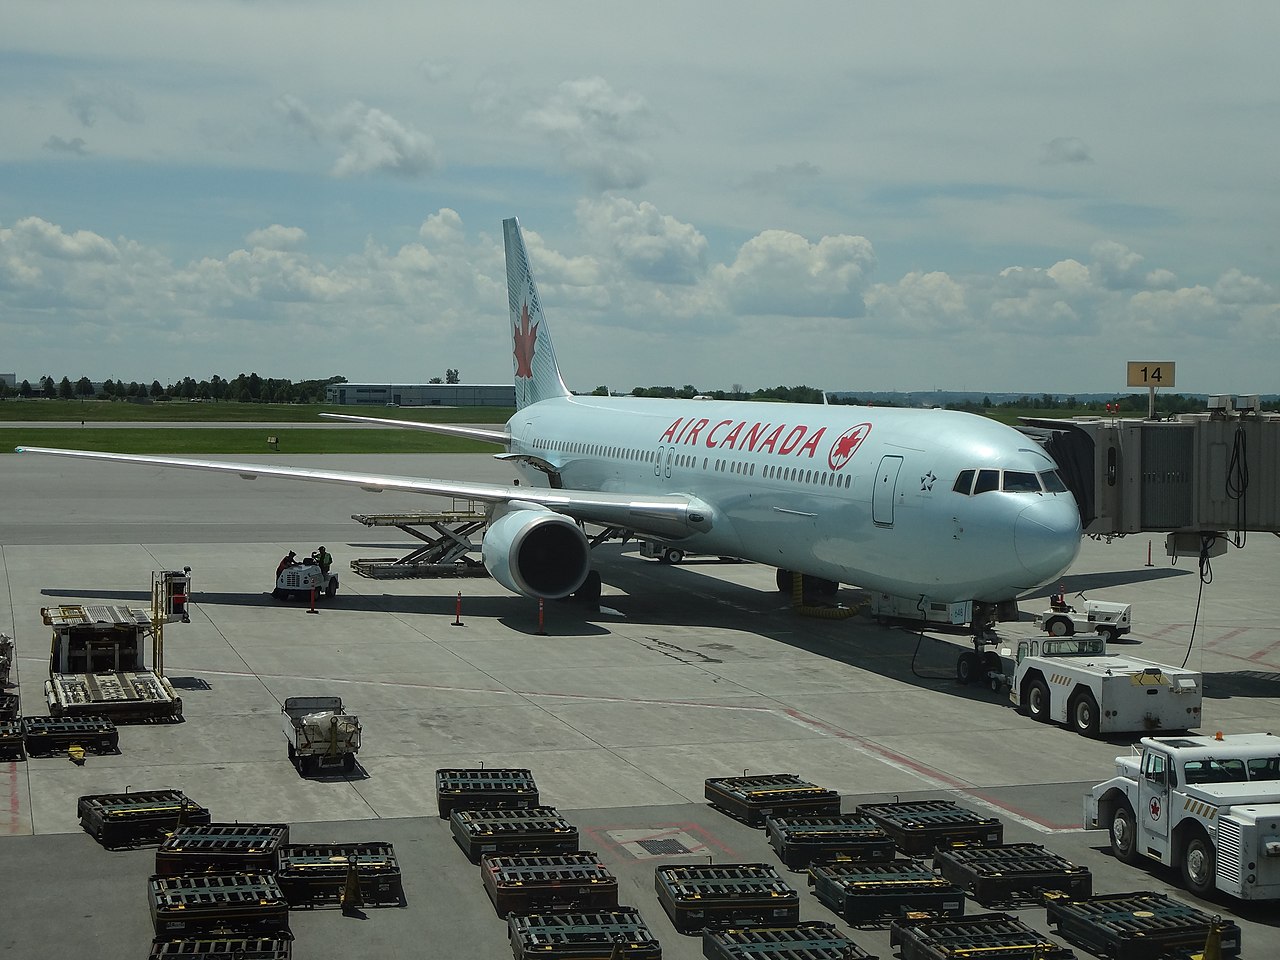 An Air Canada aircraft being loaded.